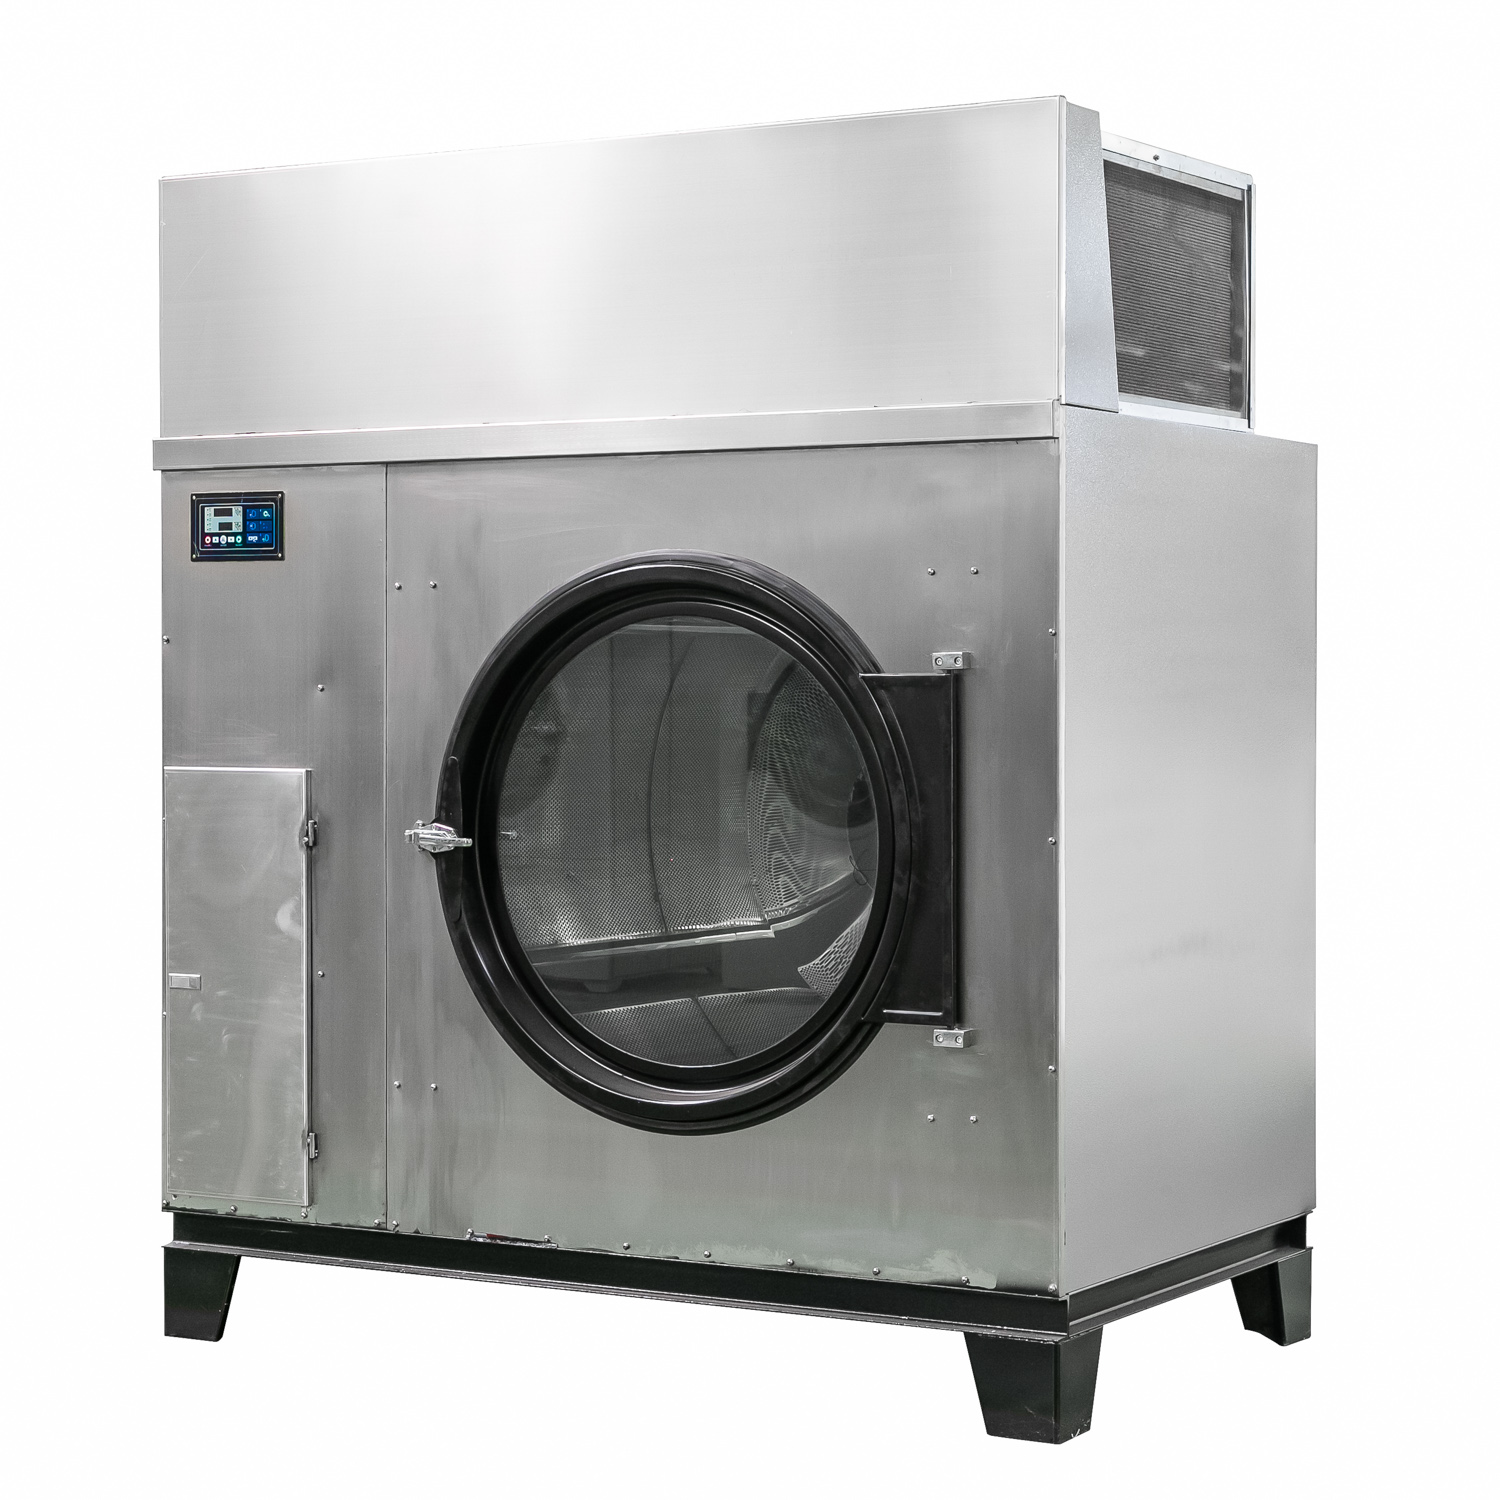 Towels Fast Speed Drying Machines 120kgs/240lbs